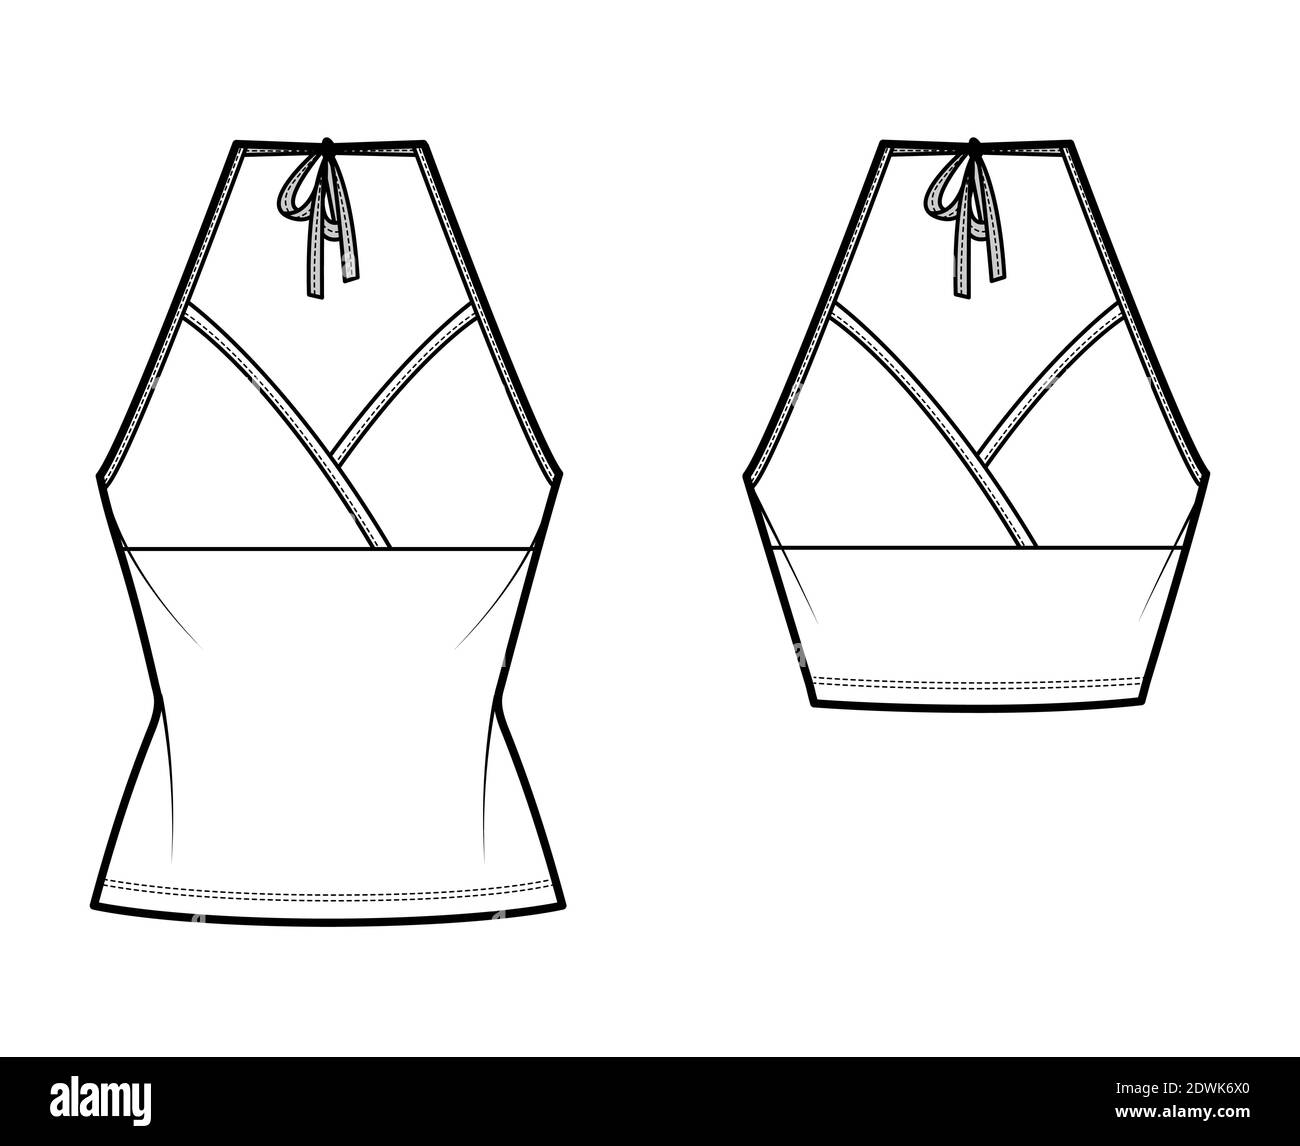 Set of Camisoles halter neck surplice tanks technical fashion illustration with empire seam, bow, slim fit, crop, tunic length. Flat top template front, white color. Women men CAD mockup Stock Vector